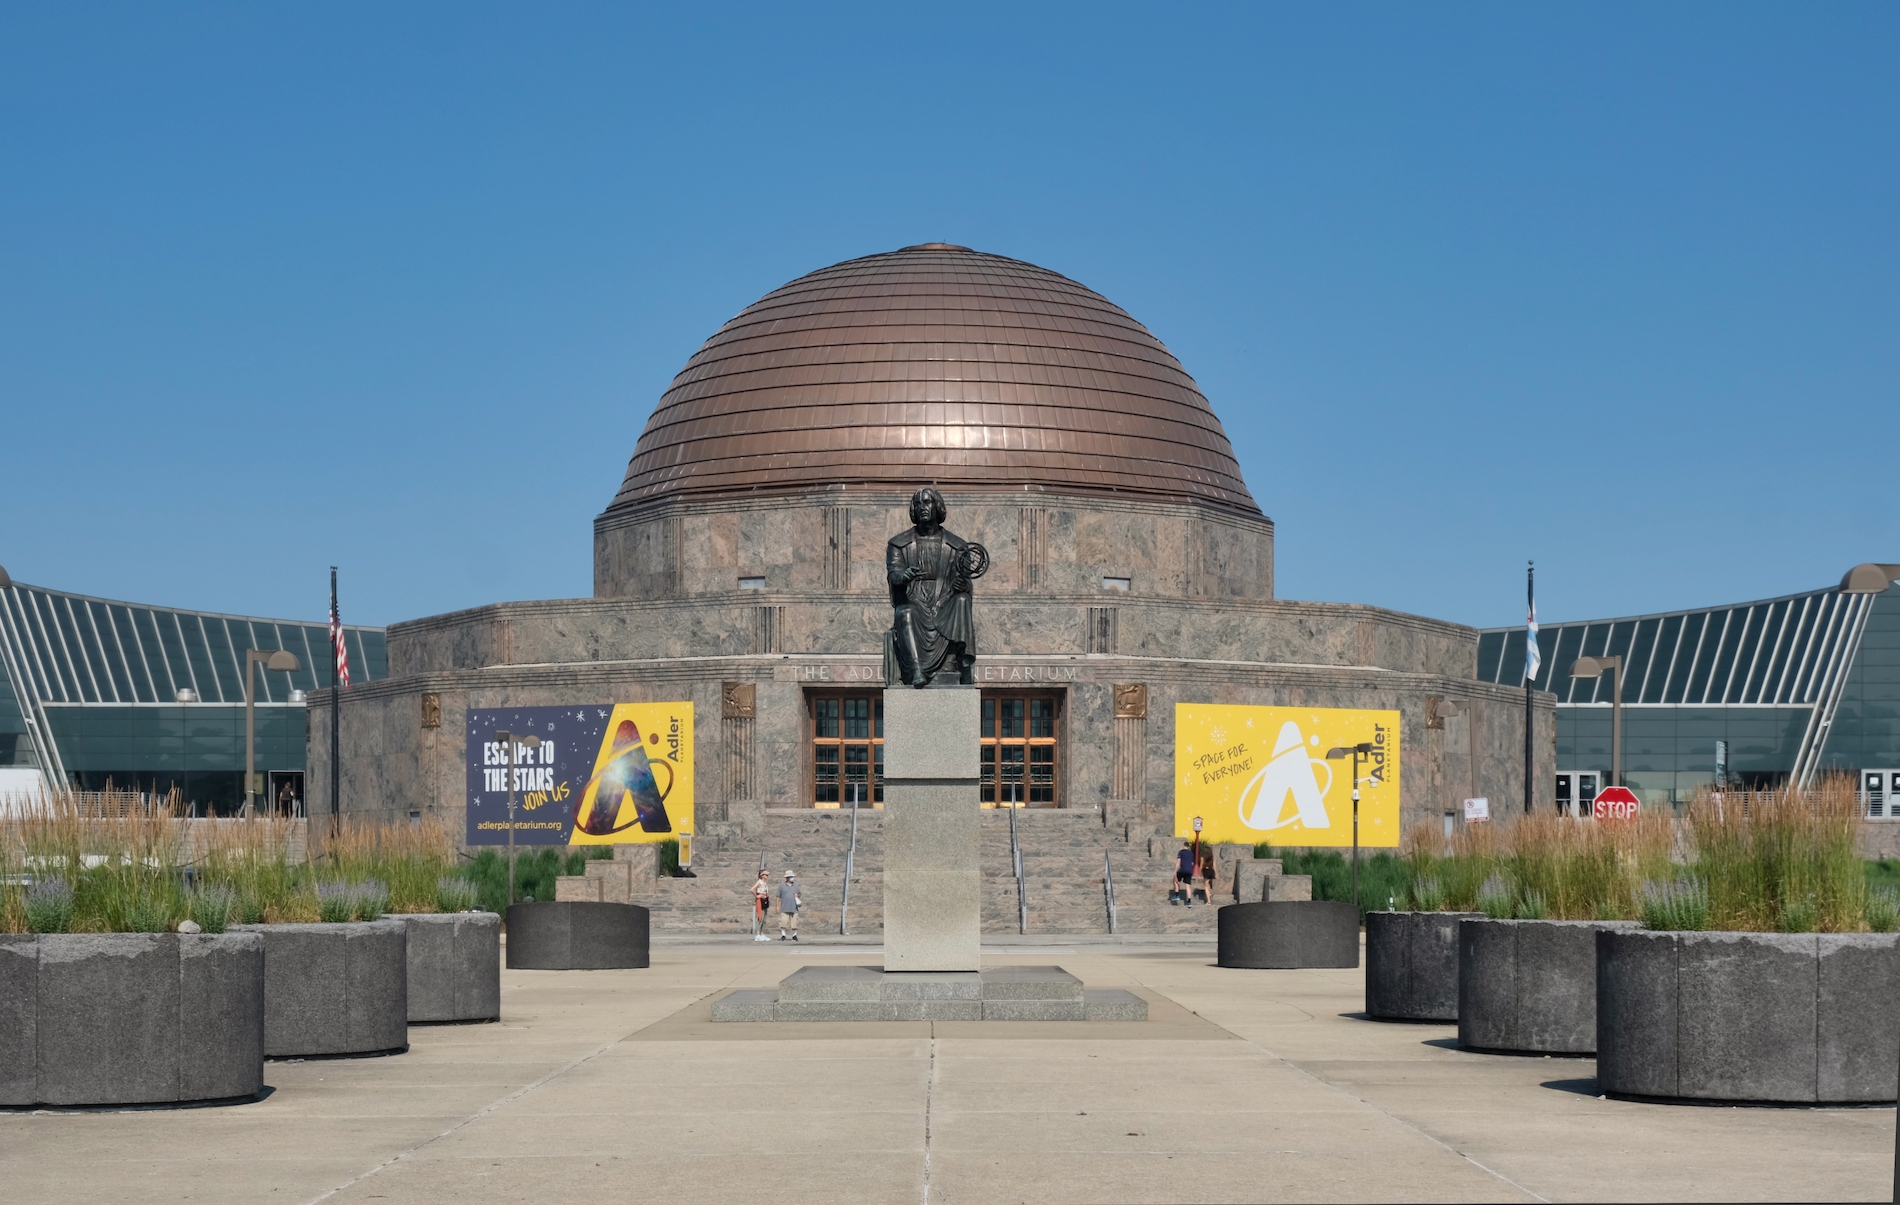 A Look at the Completed Exterior Renovation of The Adler Planetarium in Museum Campus - Chicago YIMBY